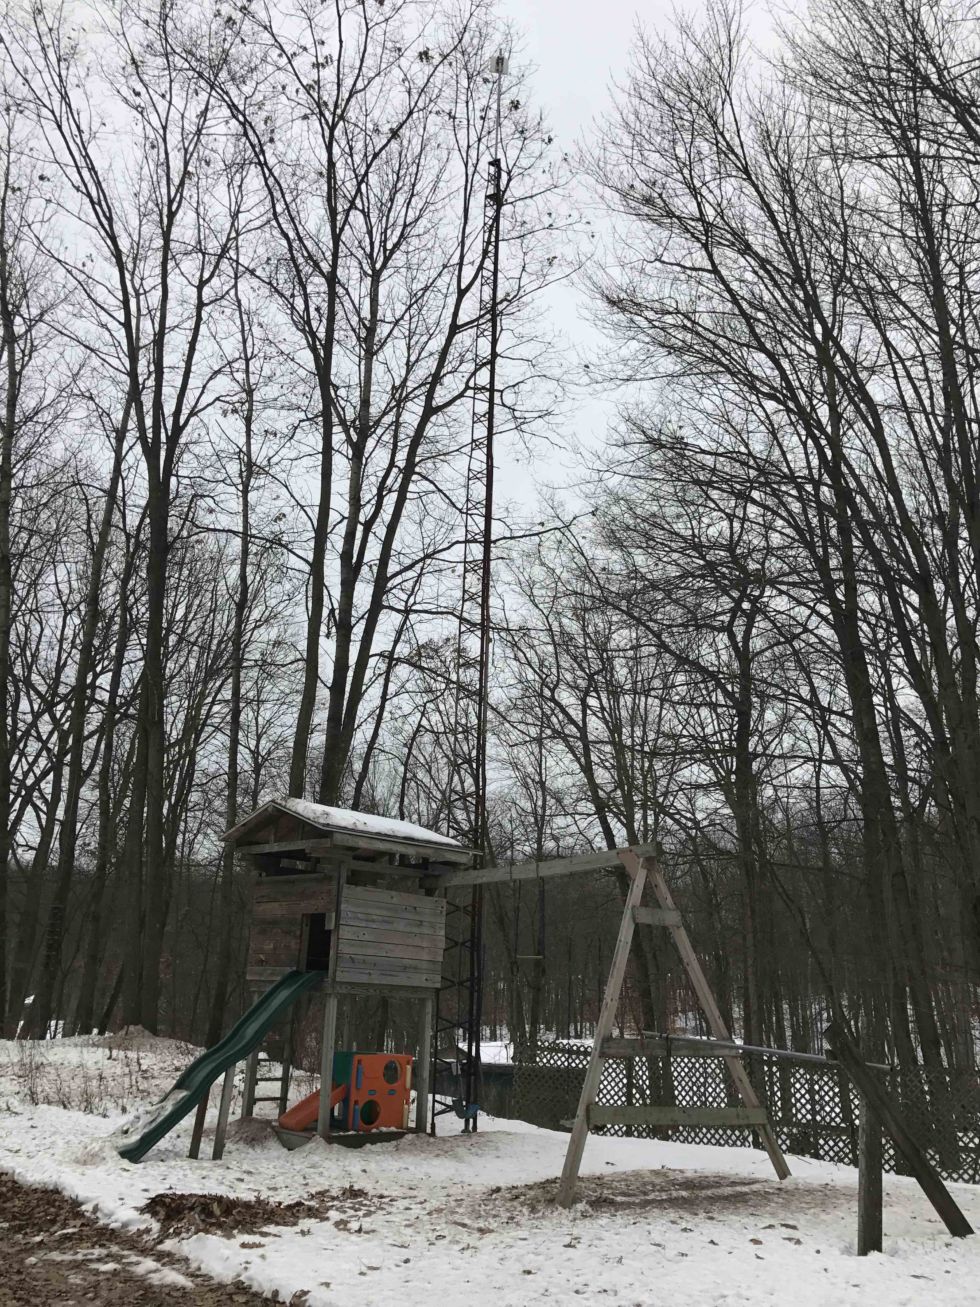 NCATS tower on the Pierce property.